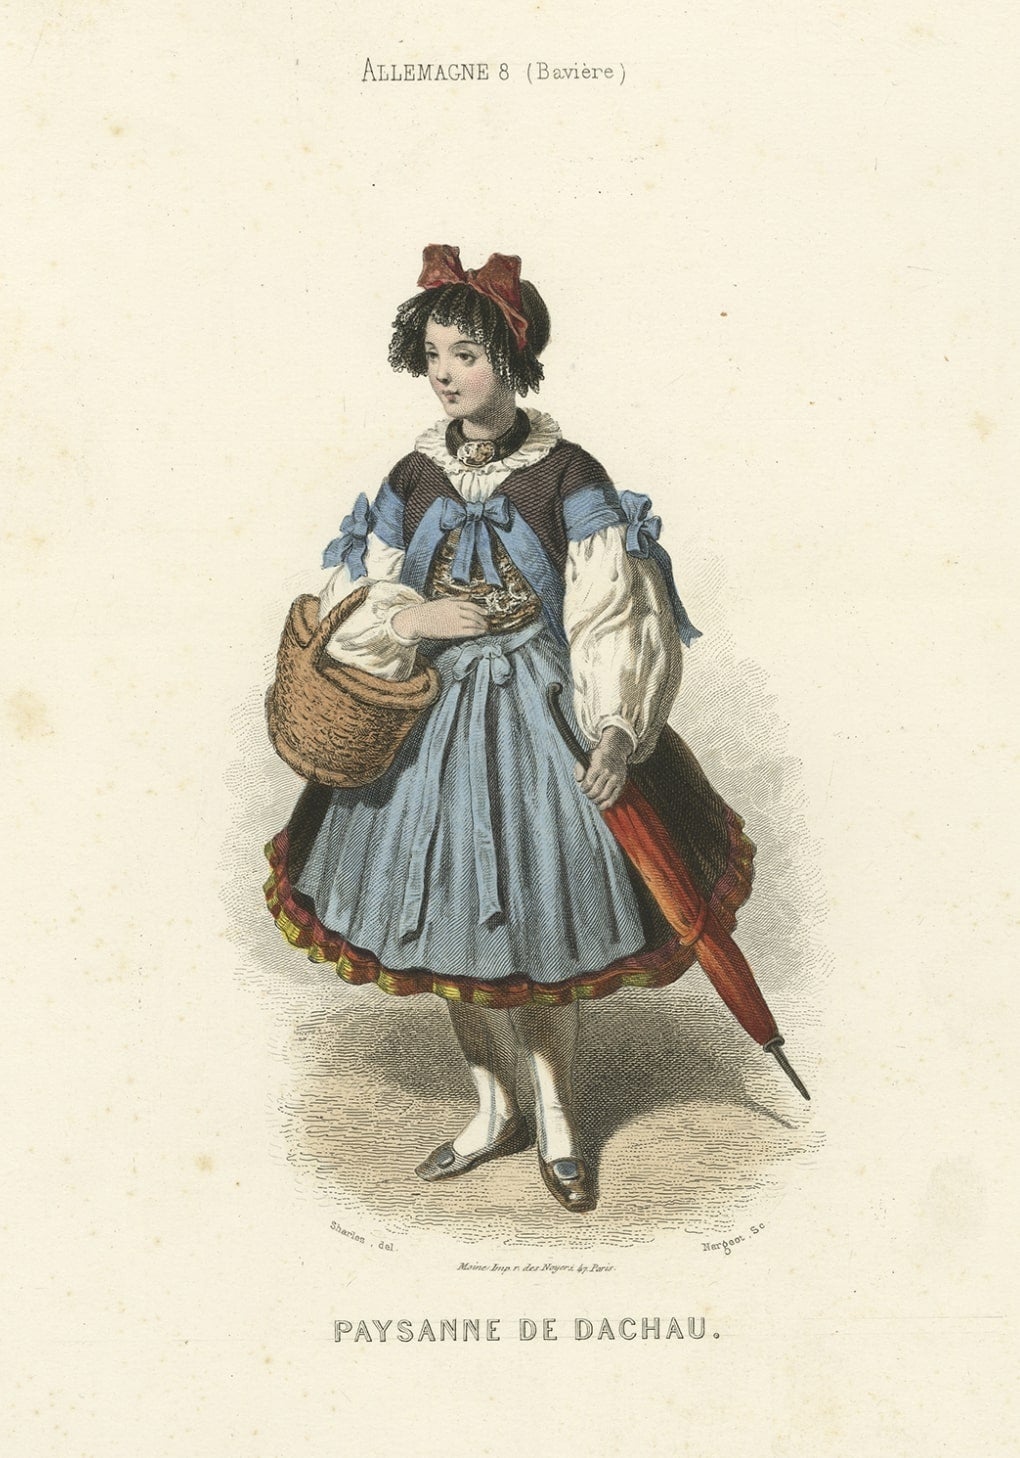 Antique costume print titled 'Paysanne de Dachau'. Old print depicting a peasant woman from Dachau, Germany. This print originates from 'Costumes Moderne (Musée de Costumes). 

Artists and Engravers: Published in Paris: Ancienne Maison